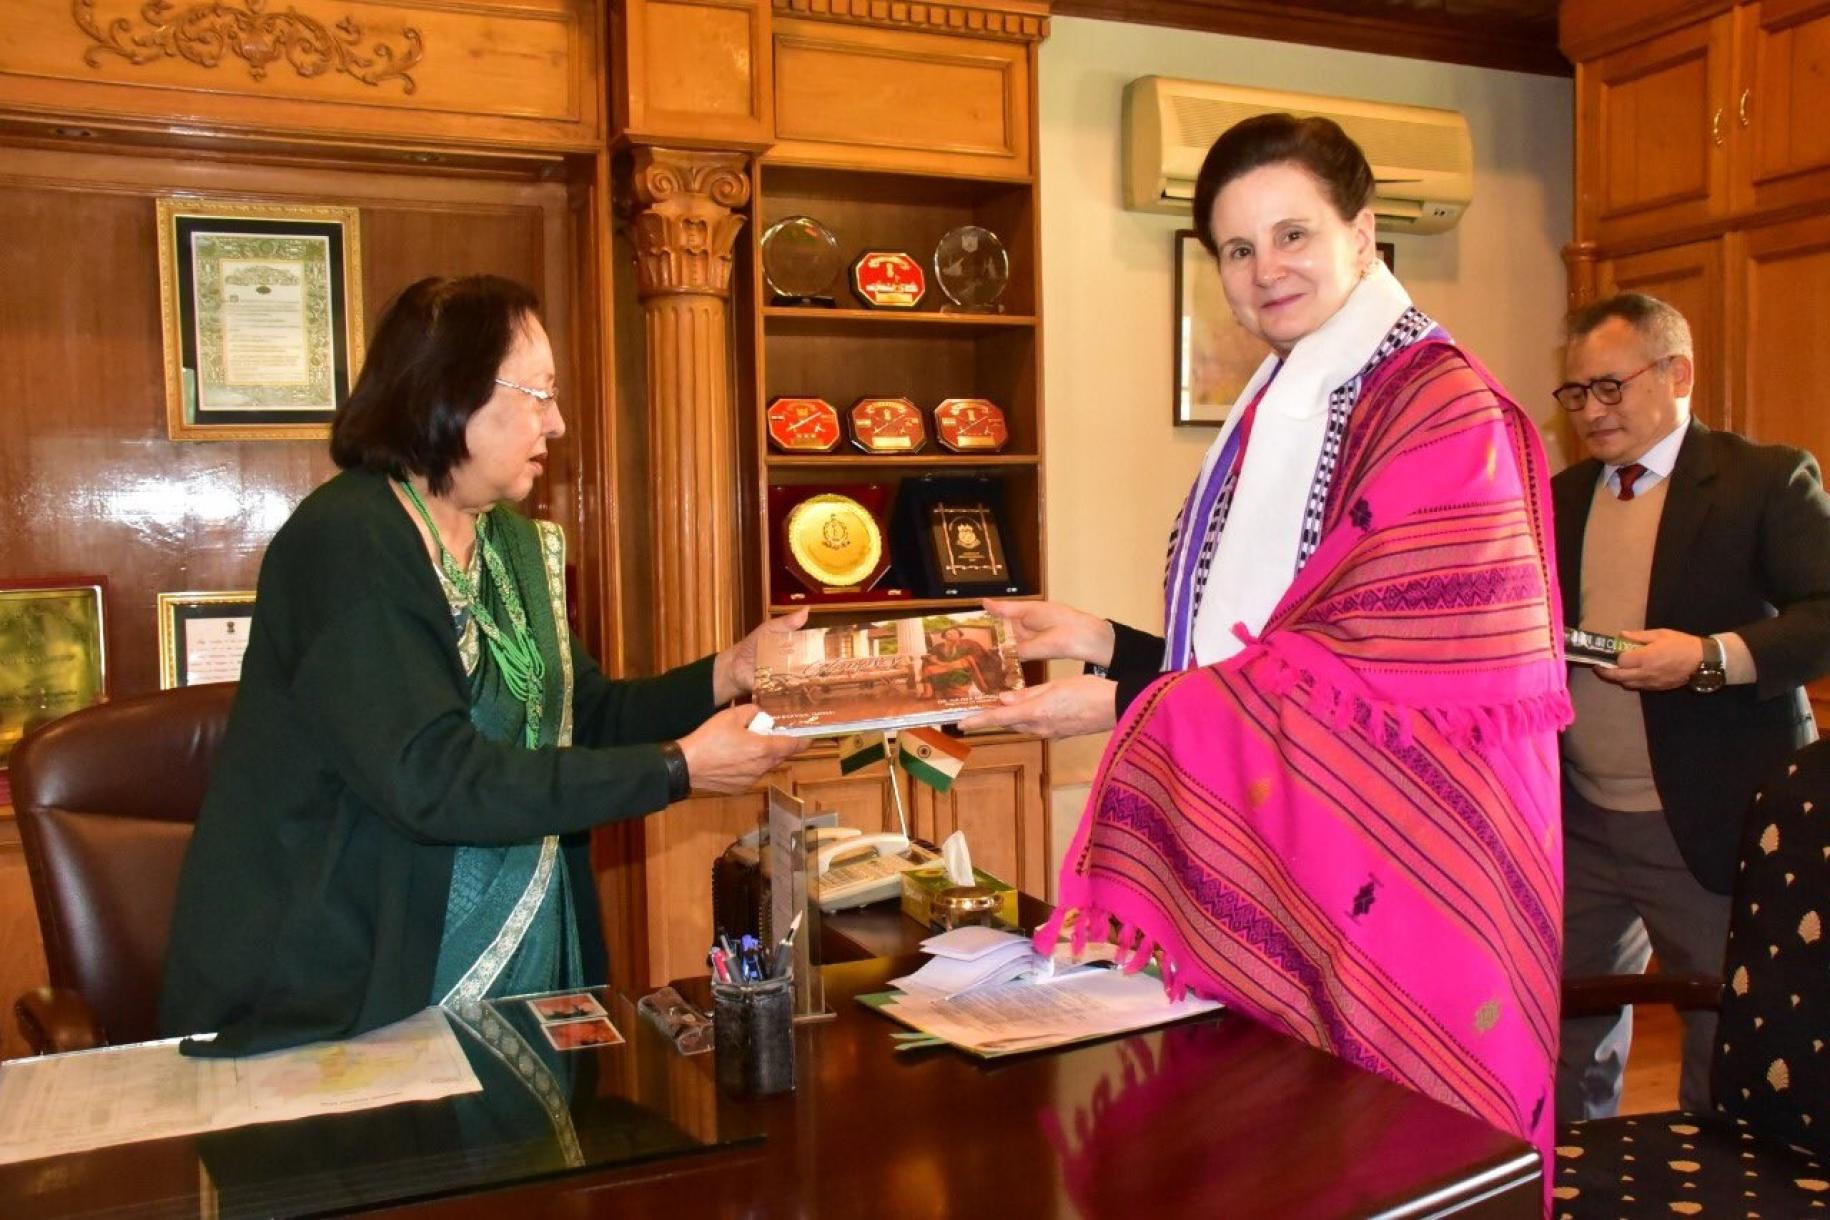 The governor of Manipur, on the left wearing a green dress, gives a document to the RC India, on the right, wearing a pink traditional clothe